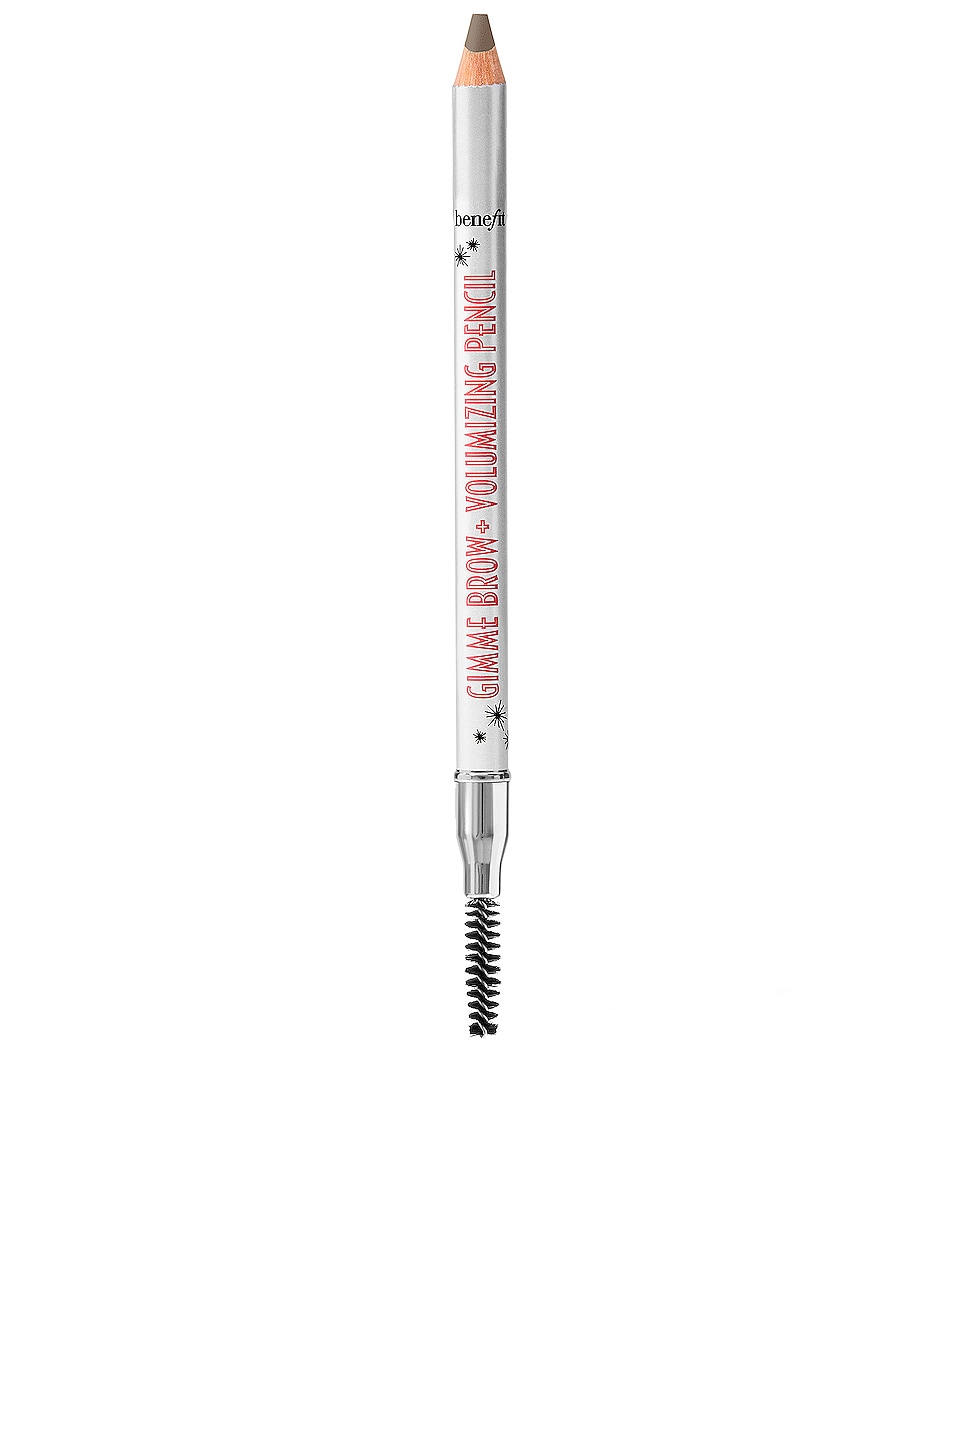 Benefit Cosmetics Powmade Brow Pomade in Shade 4.5